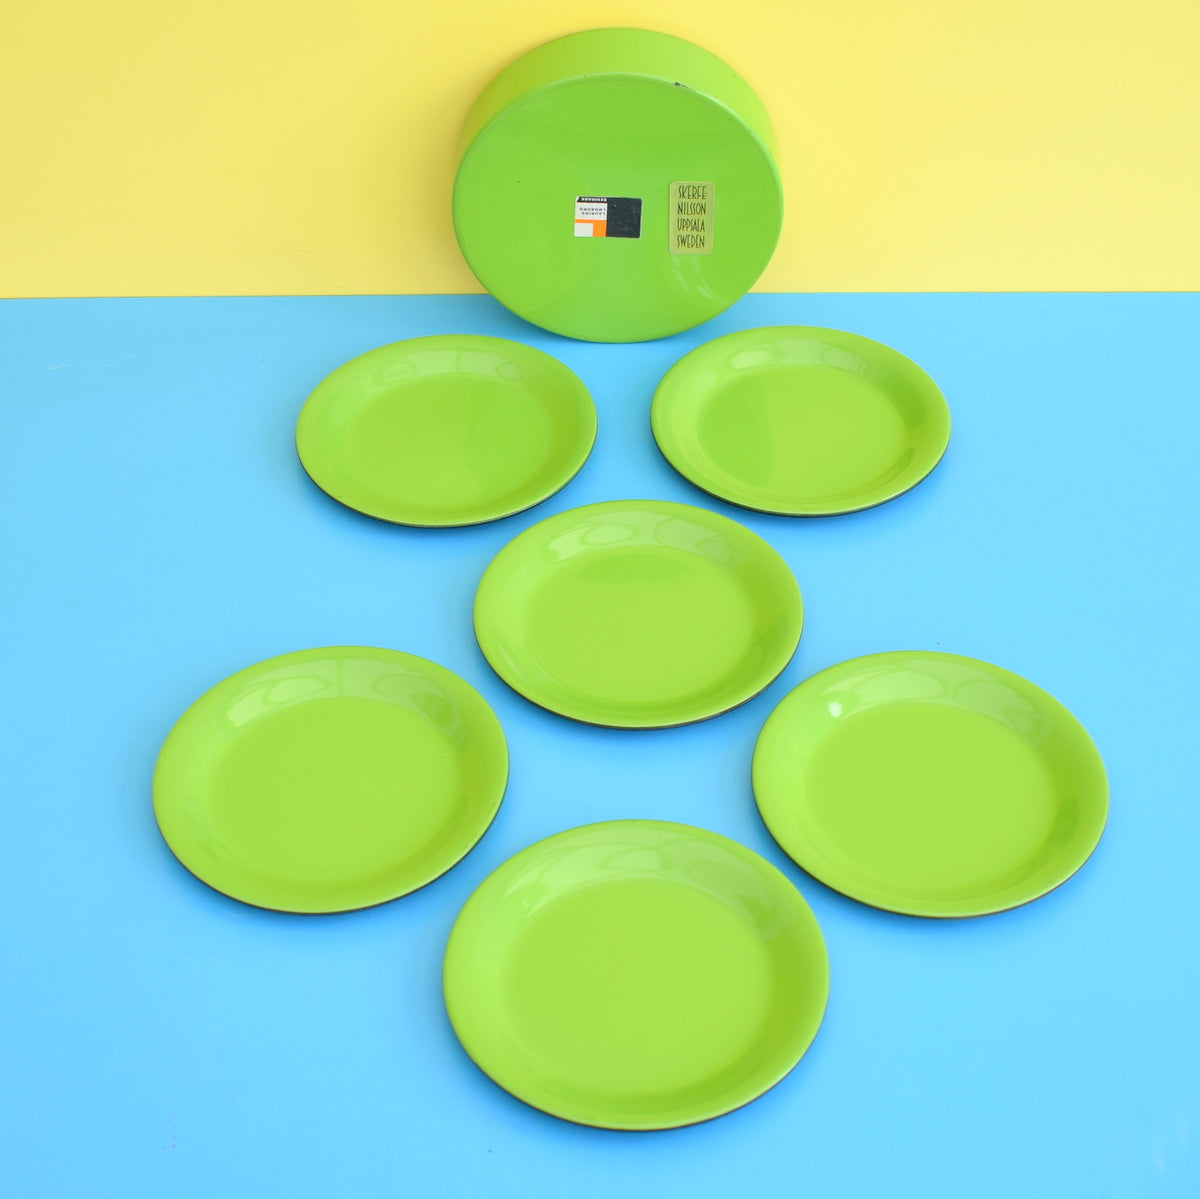 Vintage 1970s Laurids Lonborg Lacquered Coaster Set - Green